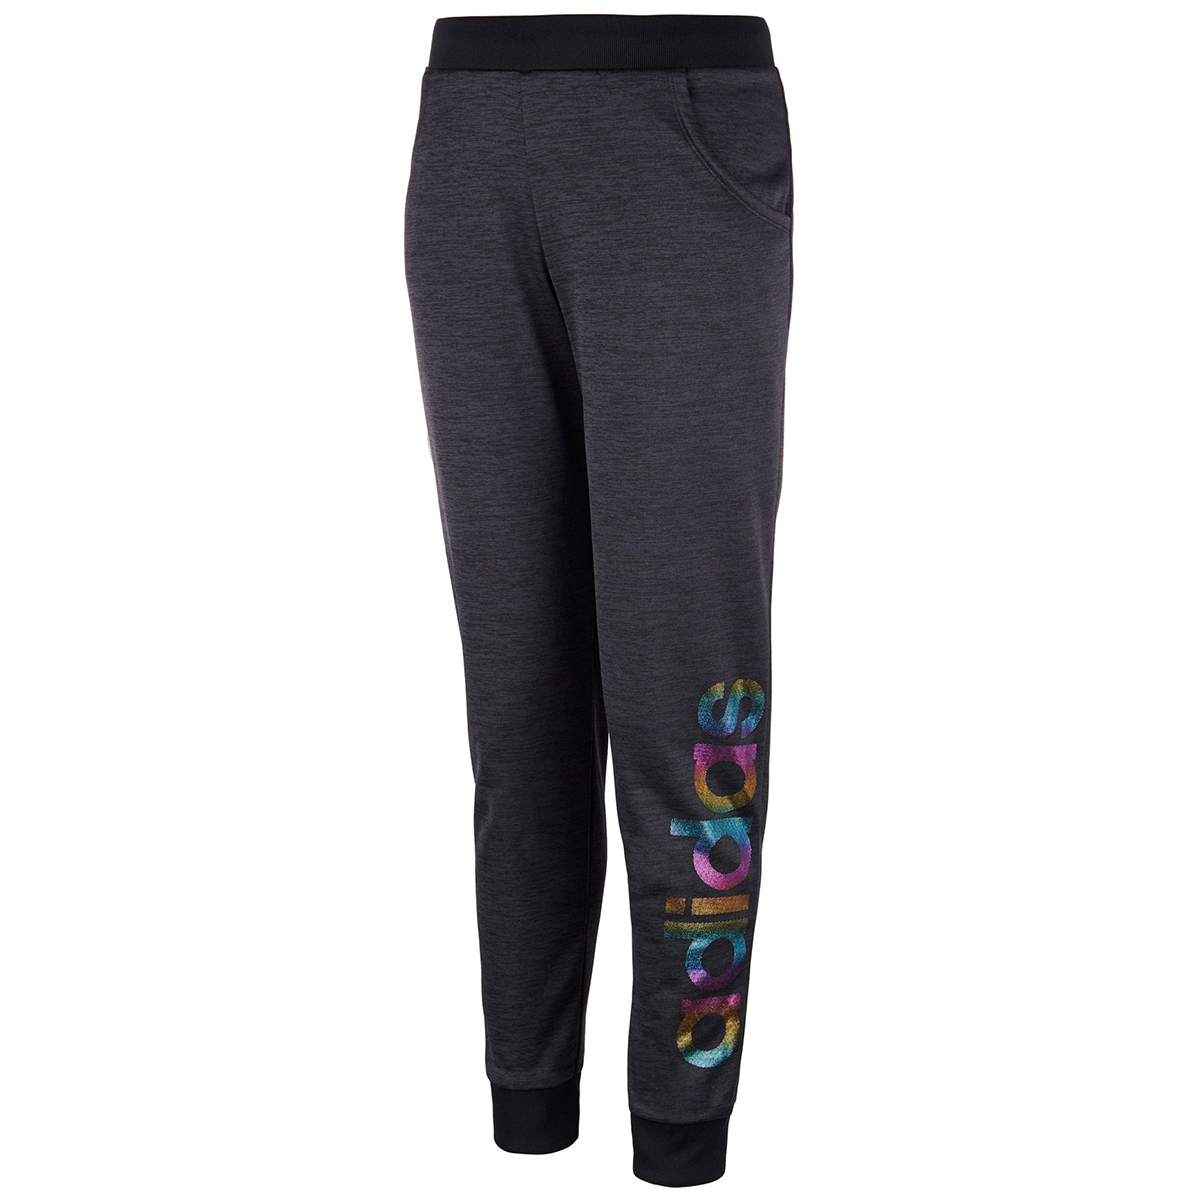 ADIDAS Girls' Tricot Jogger Pants - Eastern Mountain Sports